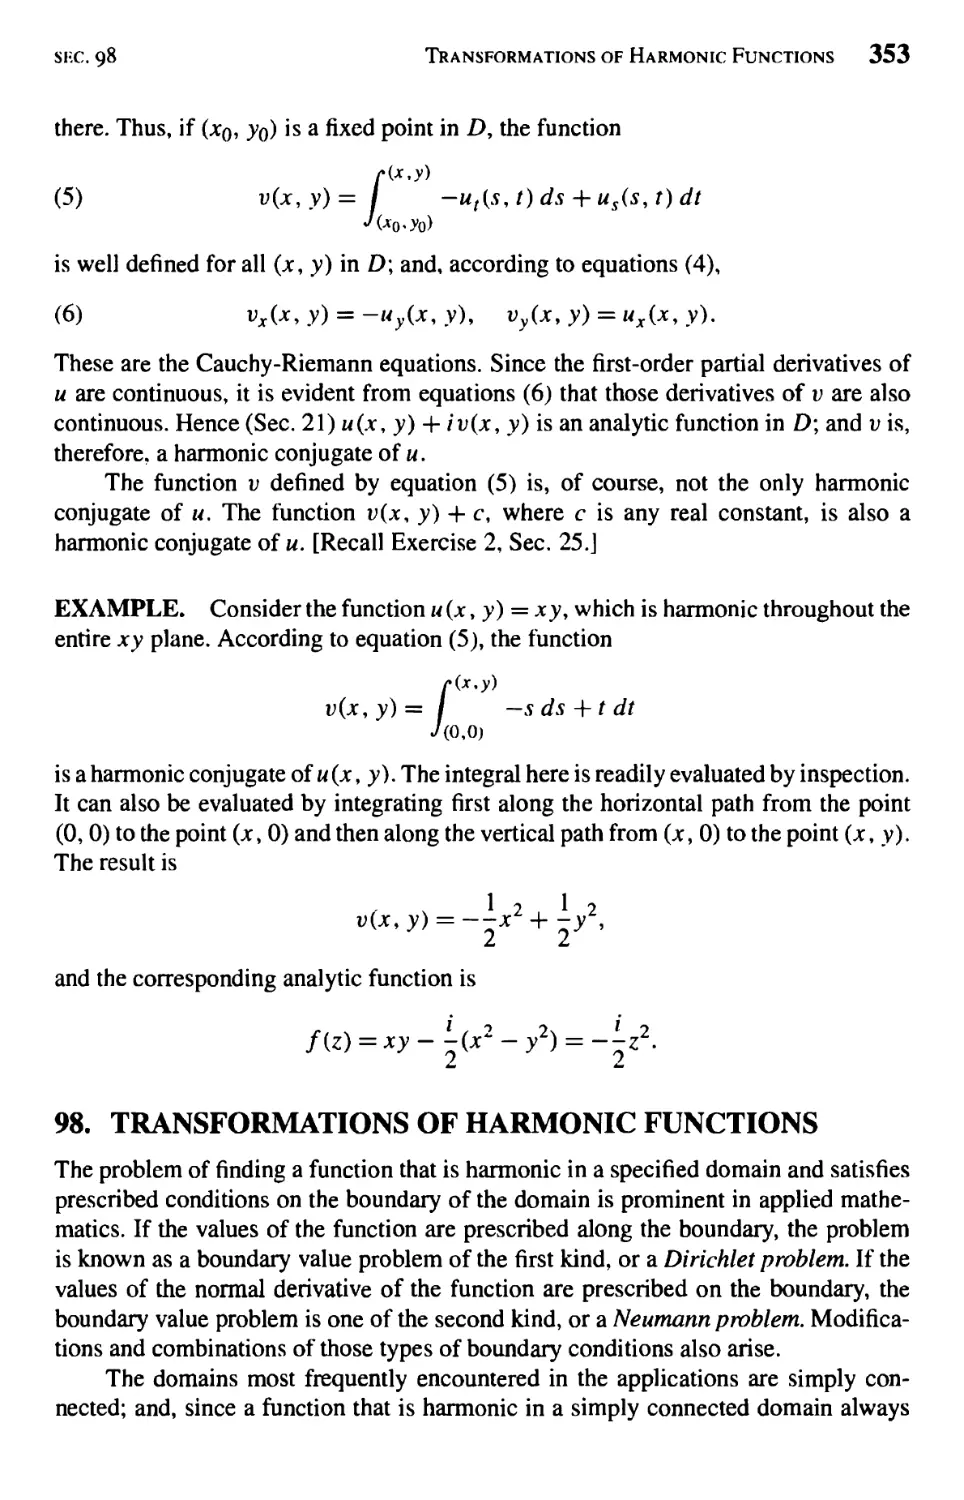 Transformations of Harmonic Functions